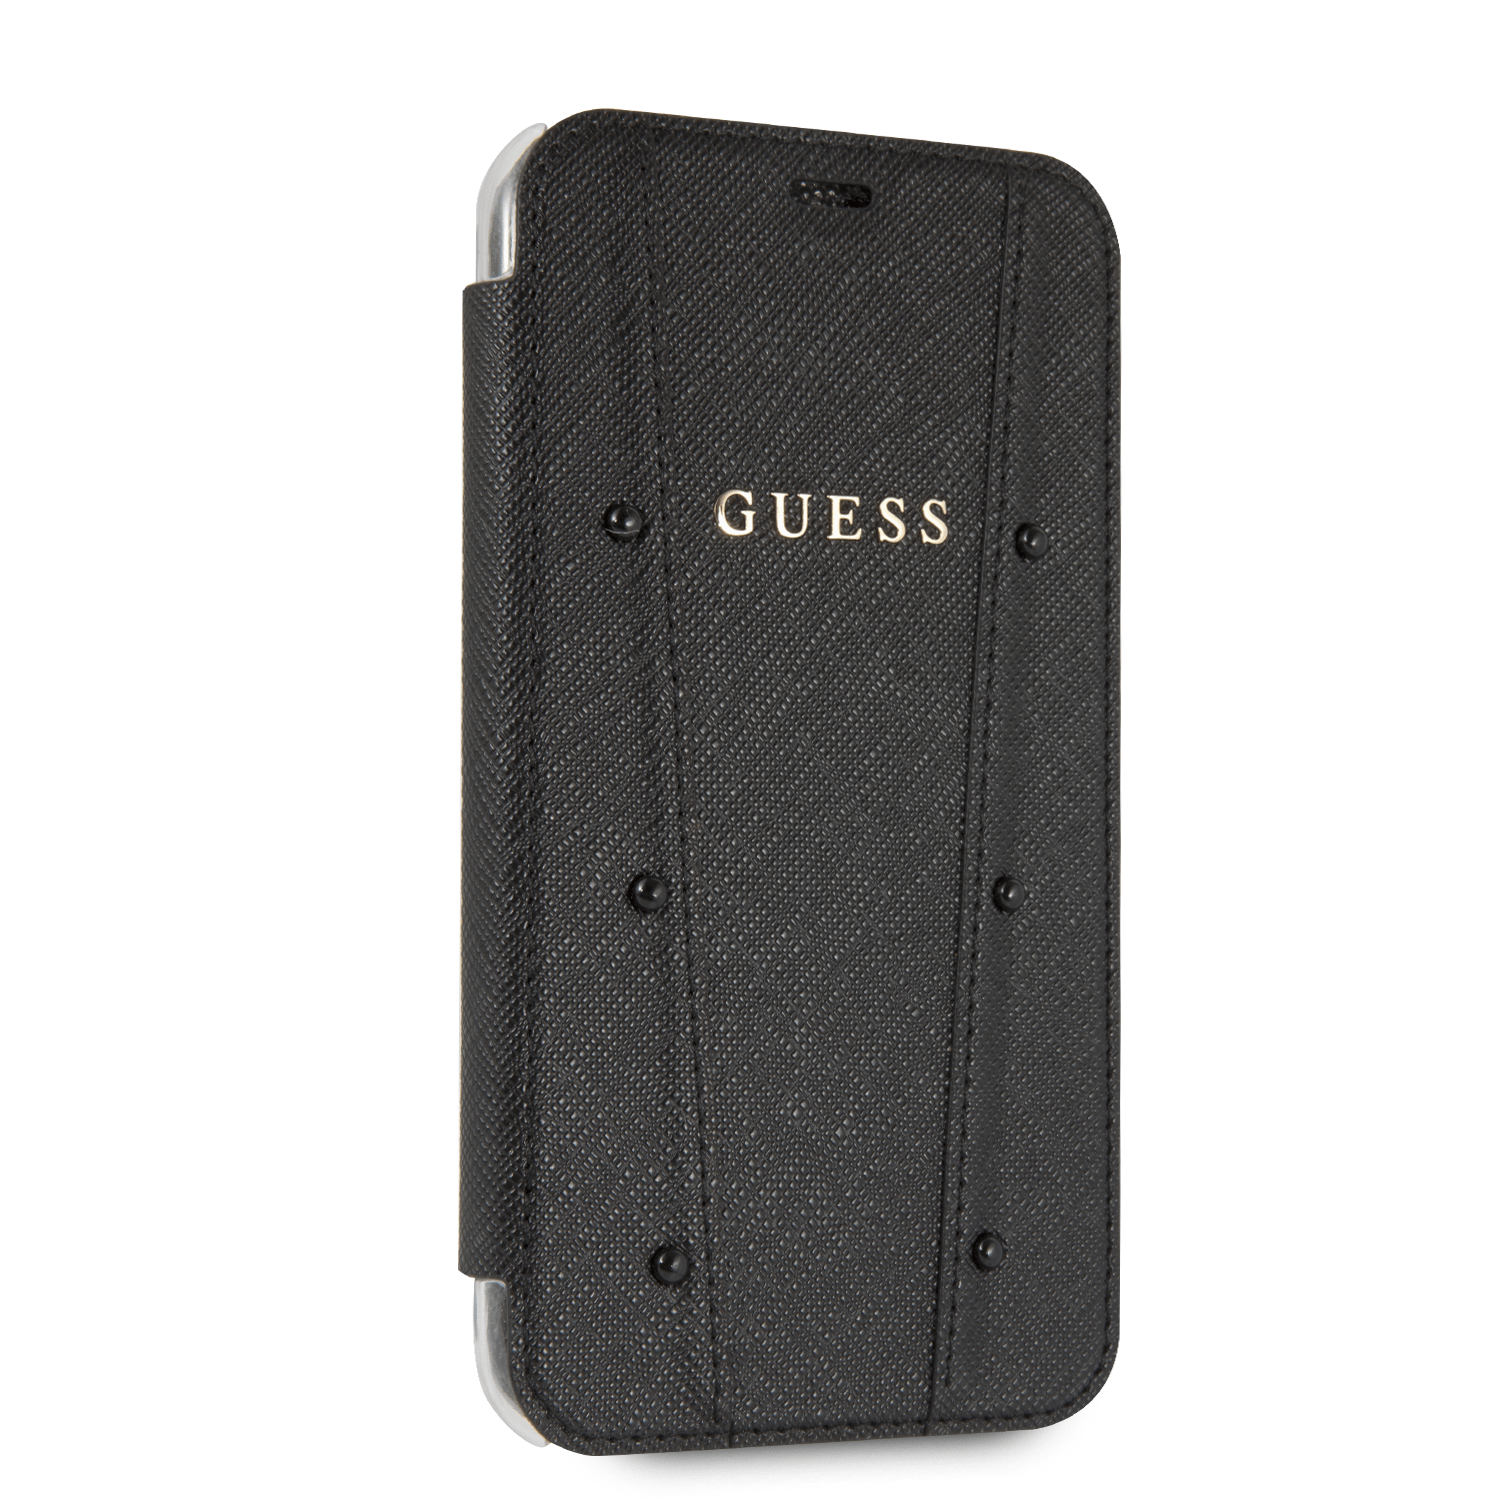 Official Guess Black Book Style Hard Phone Case for iPhone XR